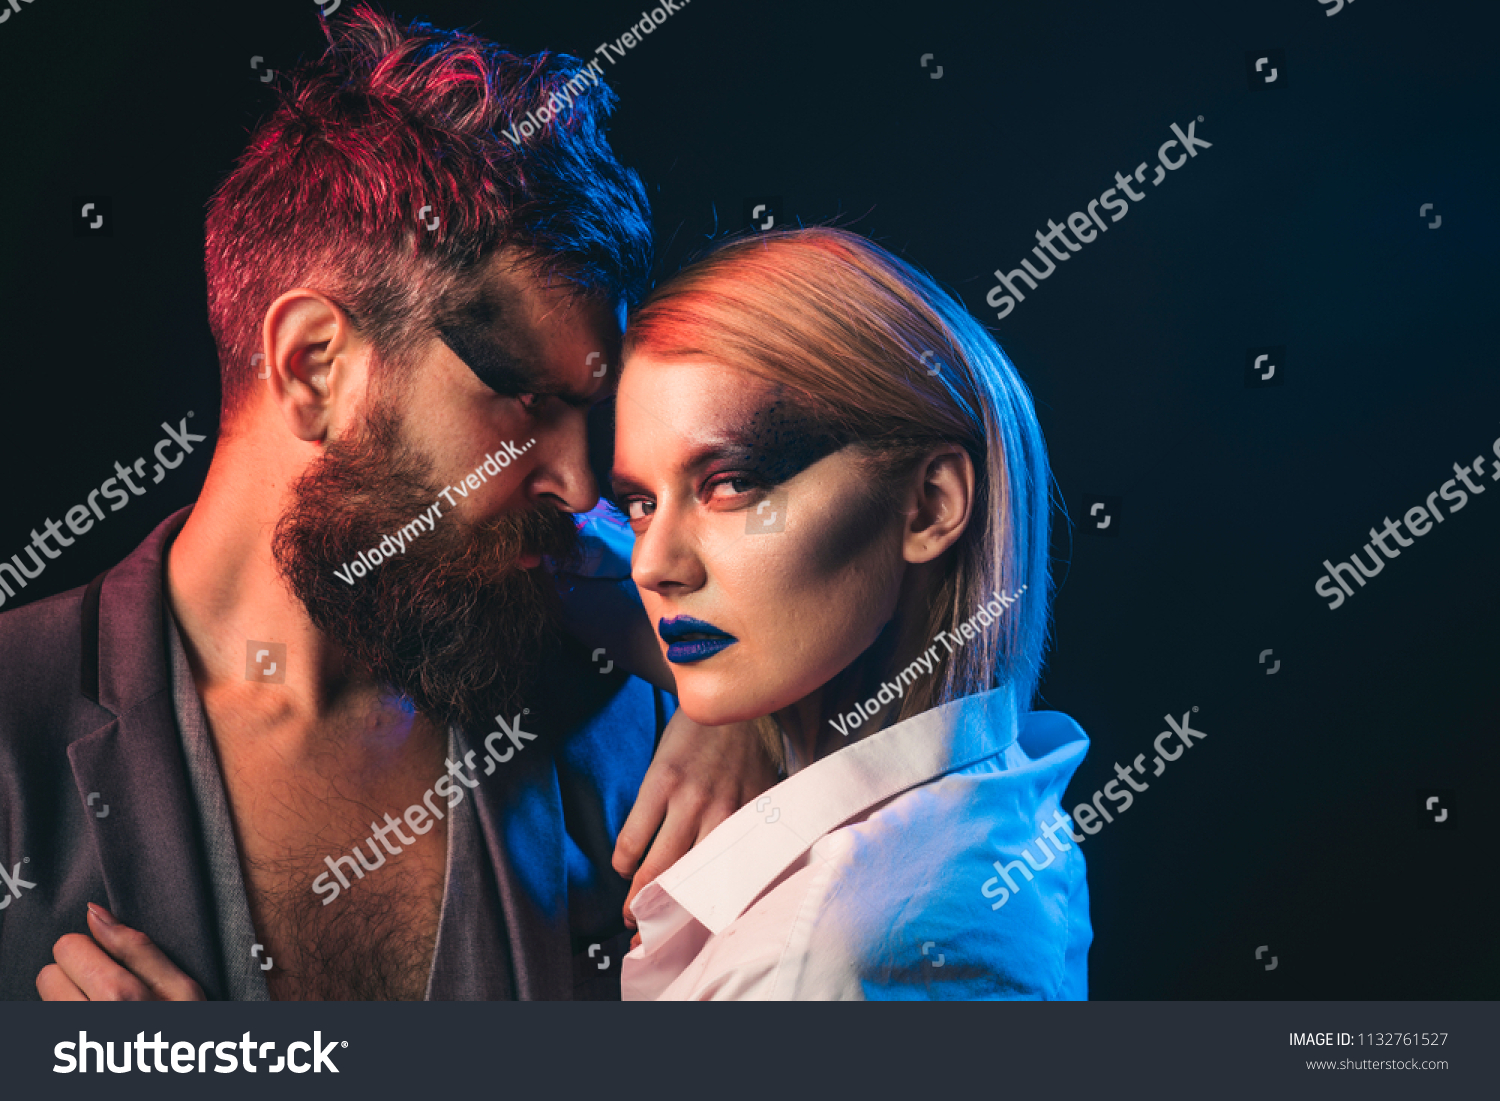 Desire concept. Fashion couple with makeup and stylish hair hug with desire. Beauty and desire. Style you desire. #1132761527